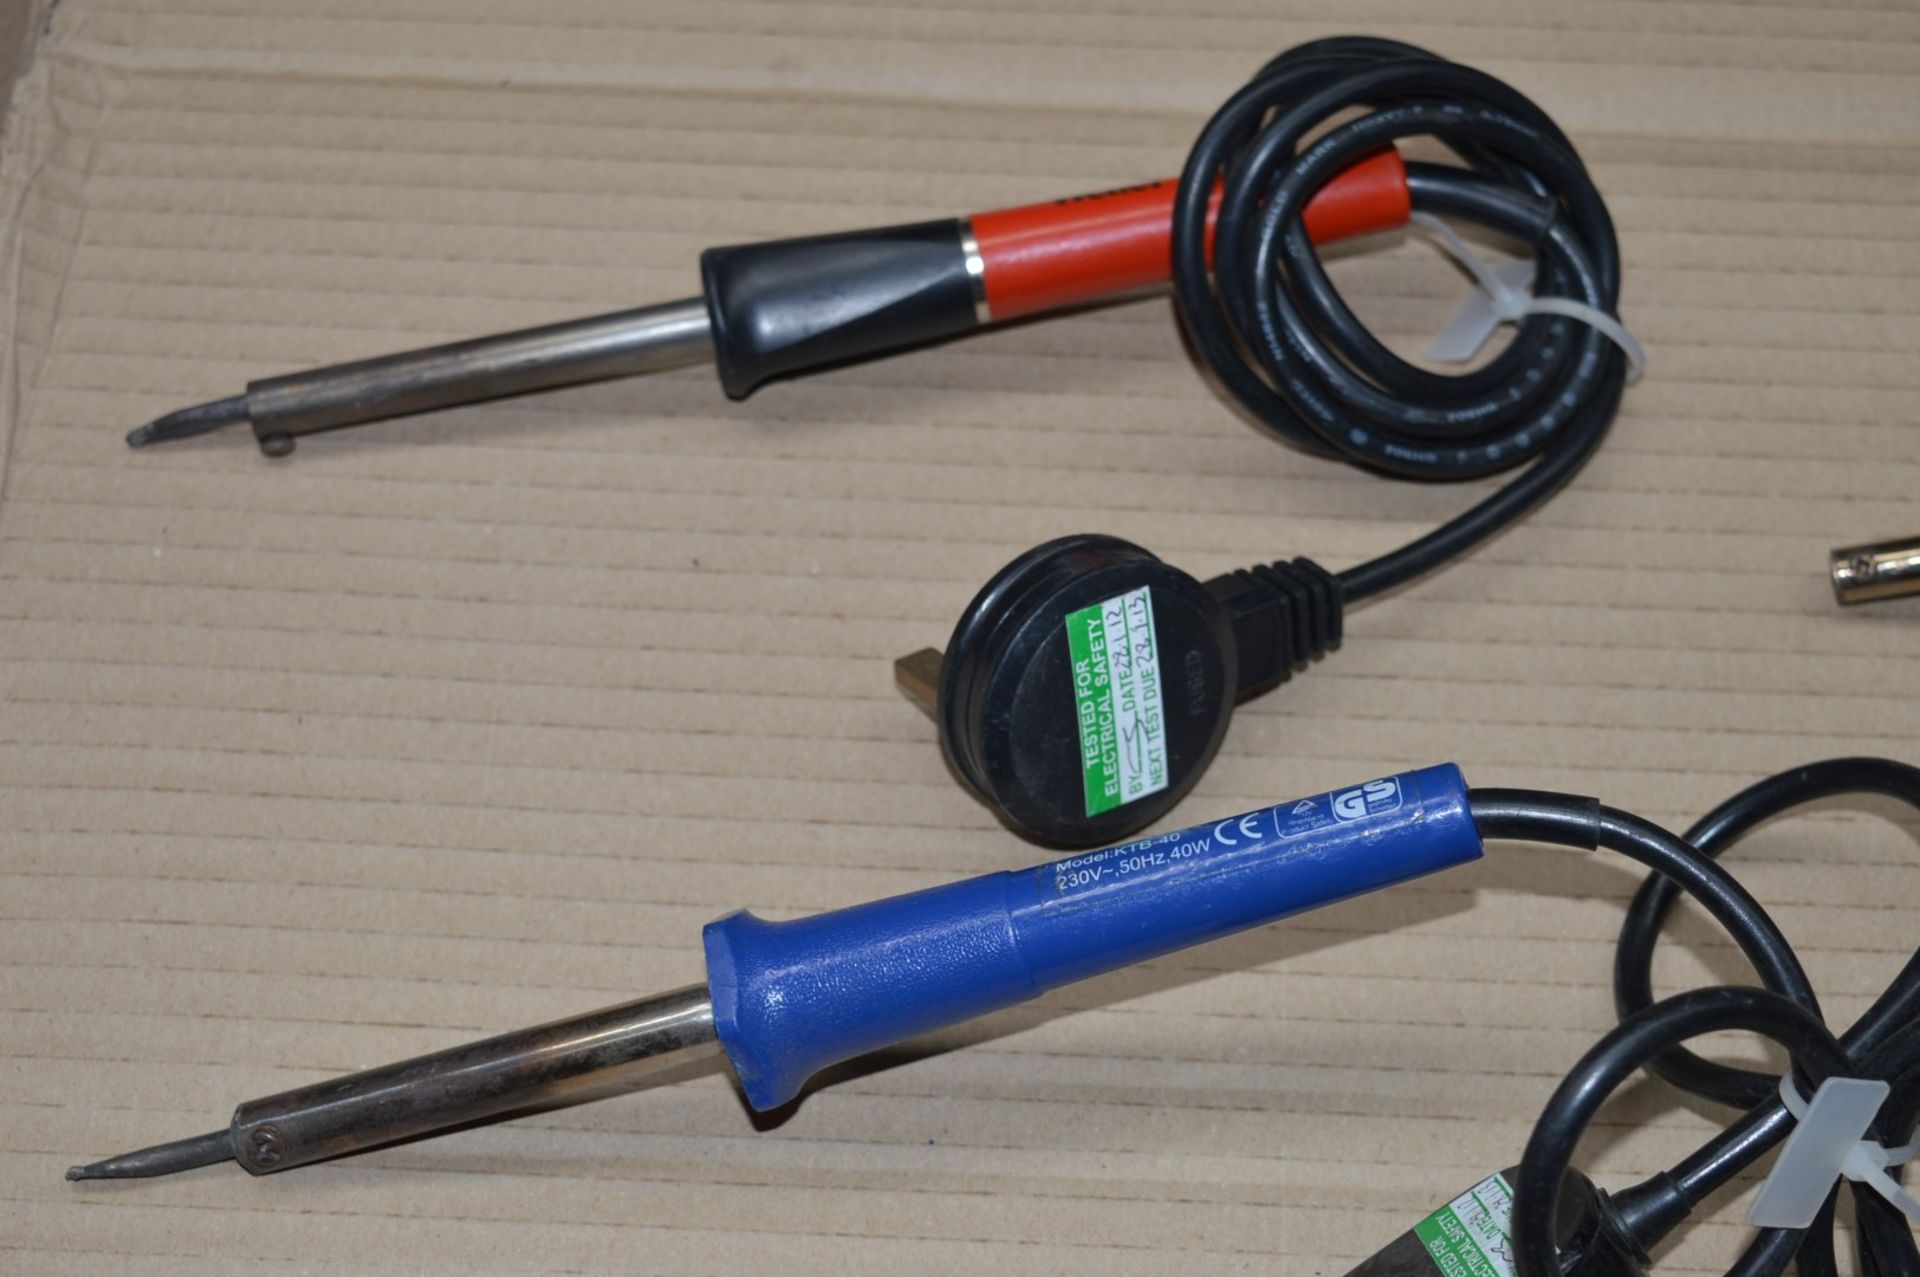 6 x Various 240v Soldering Irons - Brands Include Weller and Draper - CL300 - Ref JP105 - - Image 11 of 22